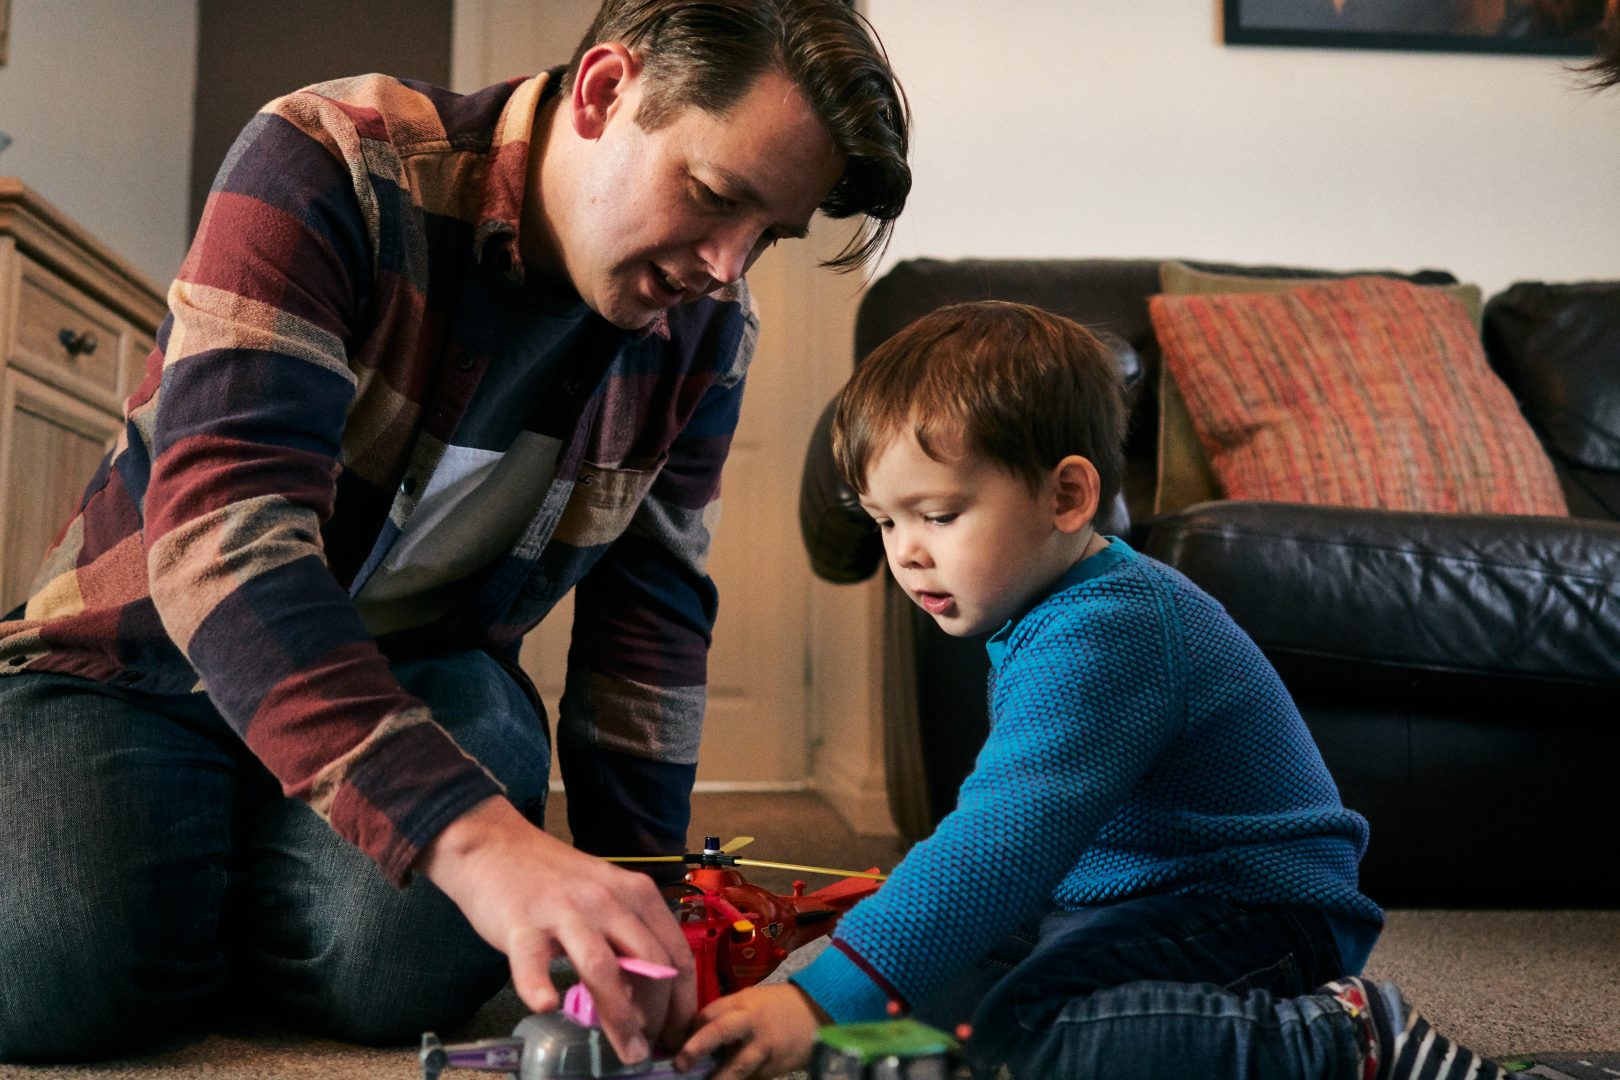 dad and son play with cars on their living room floor